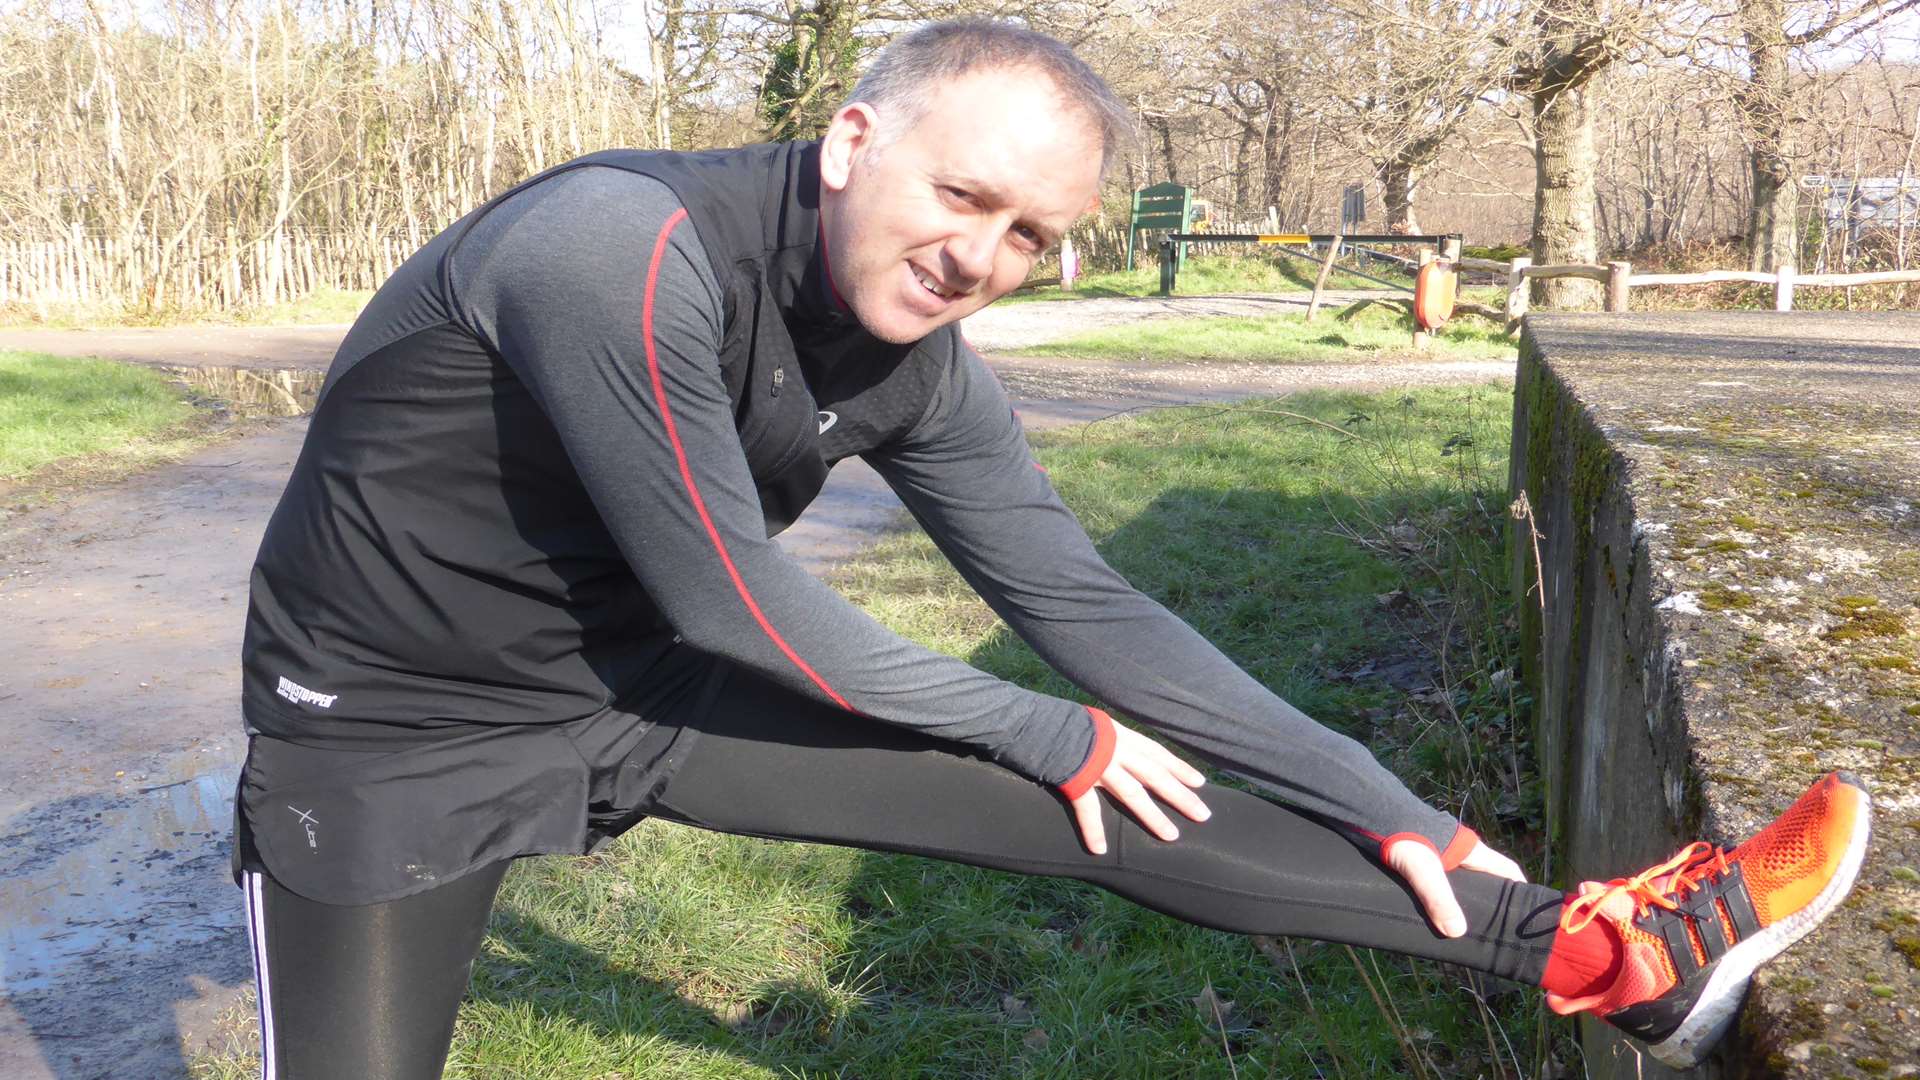 Carl Stoakes of Whitstable will be running the Virgin Money London Marathon 2016 to raise funds for the KM Charity Team